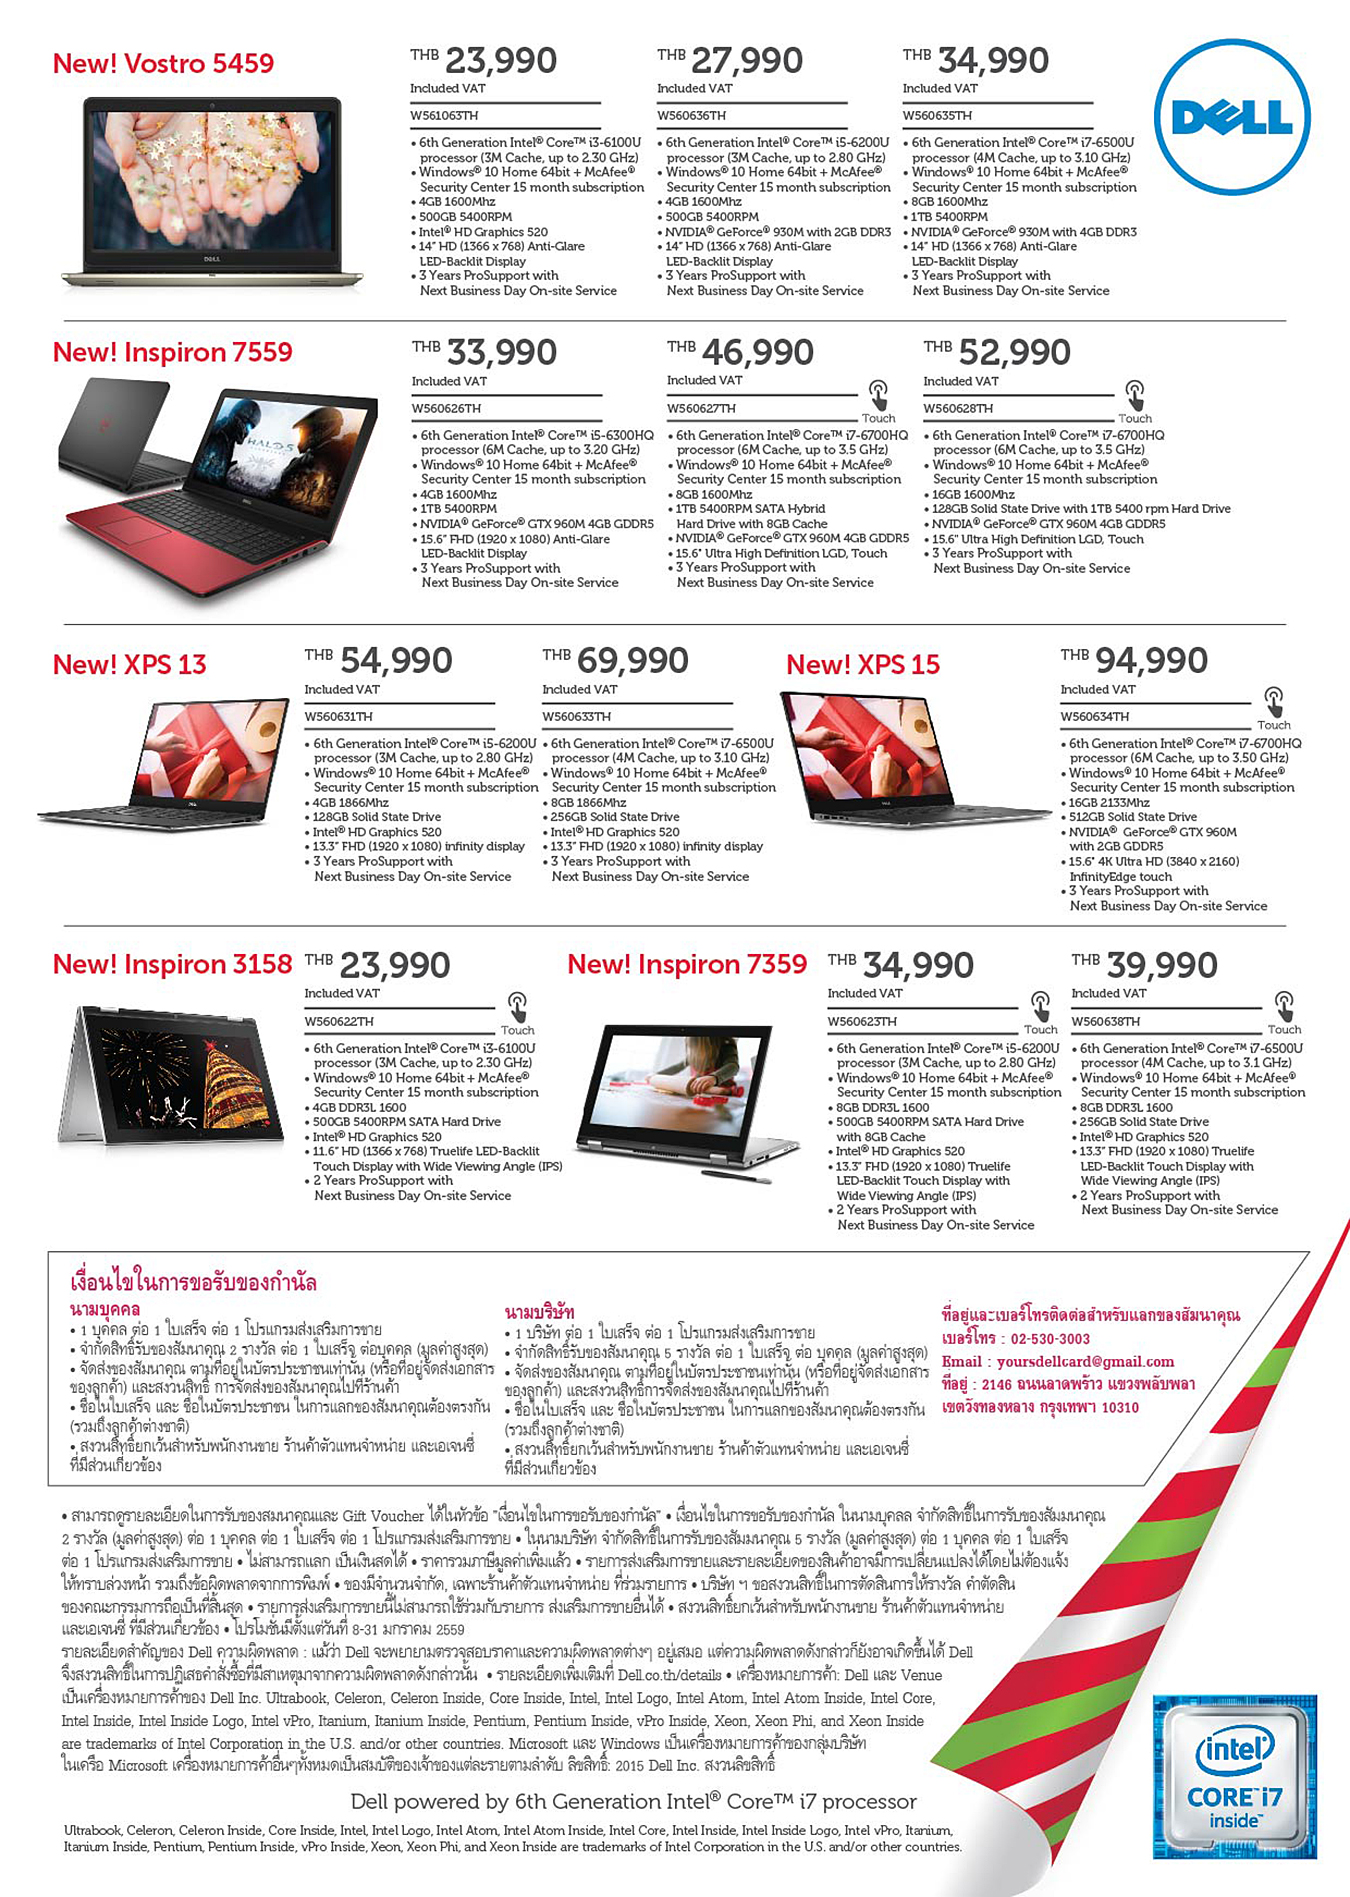 Dell-Holiday-Promotion-02